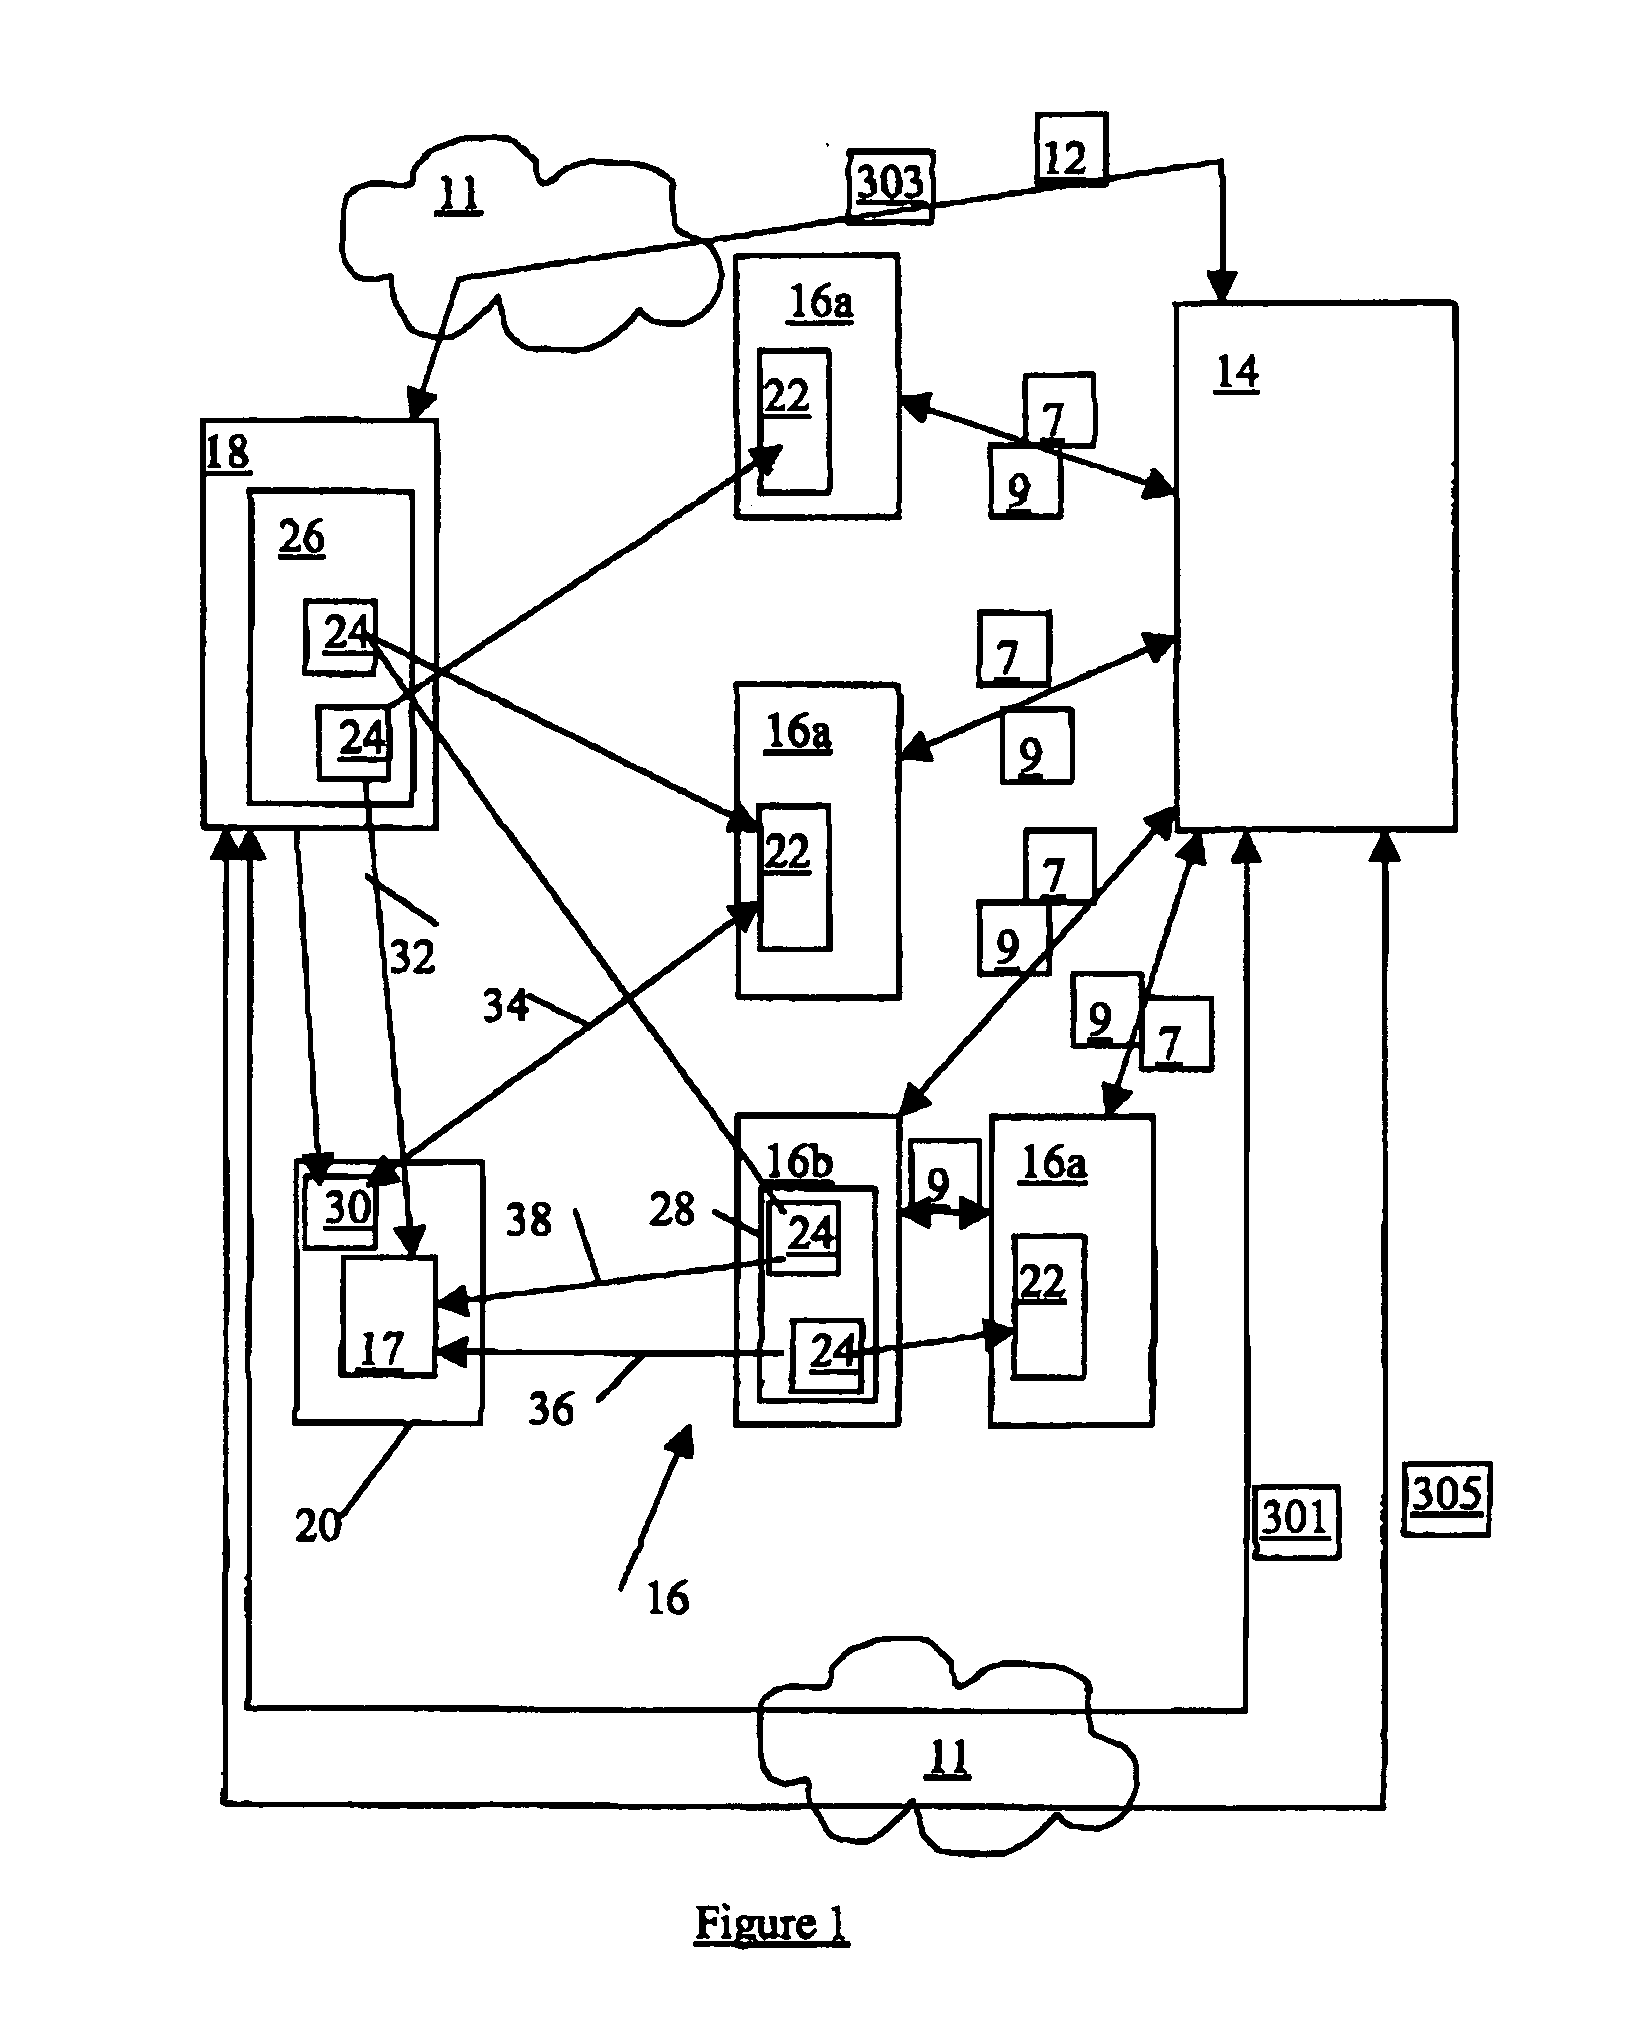 Advancing payment to an affiliate based on company electronic link activity